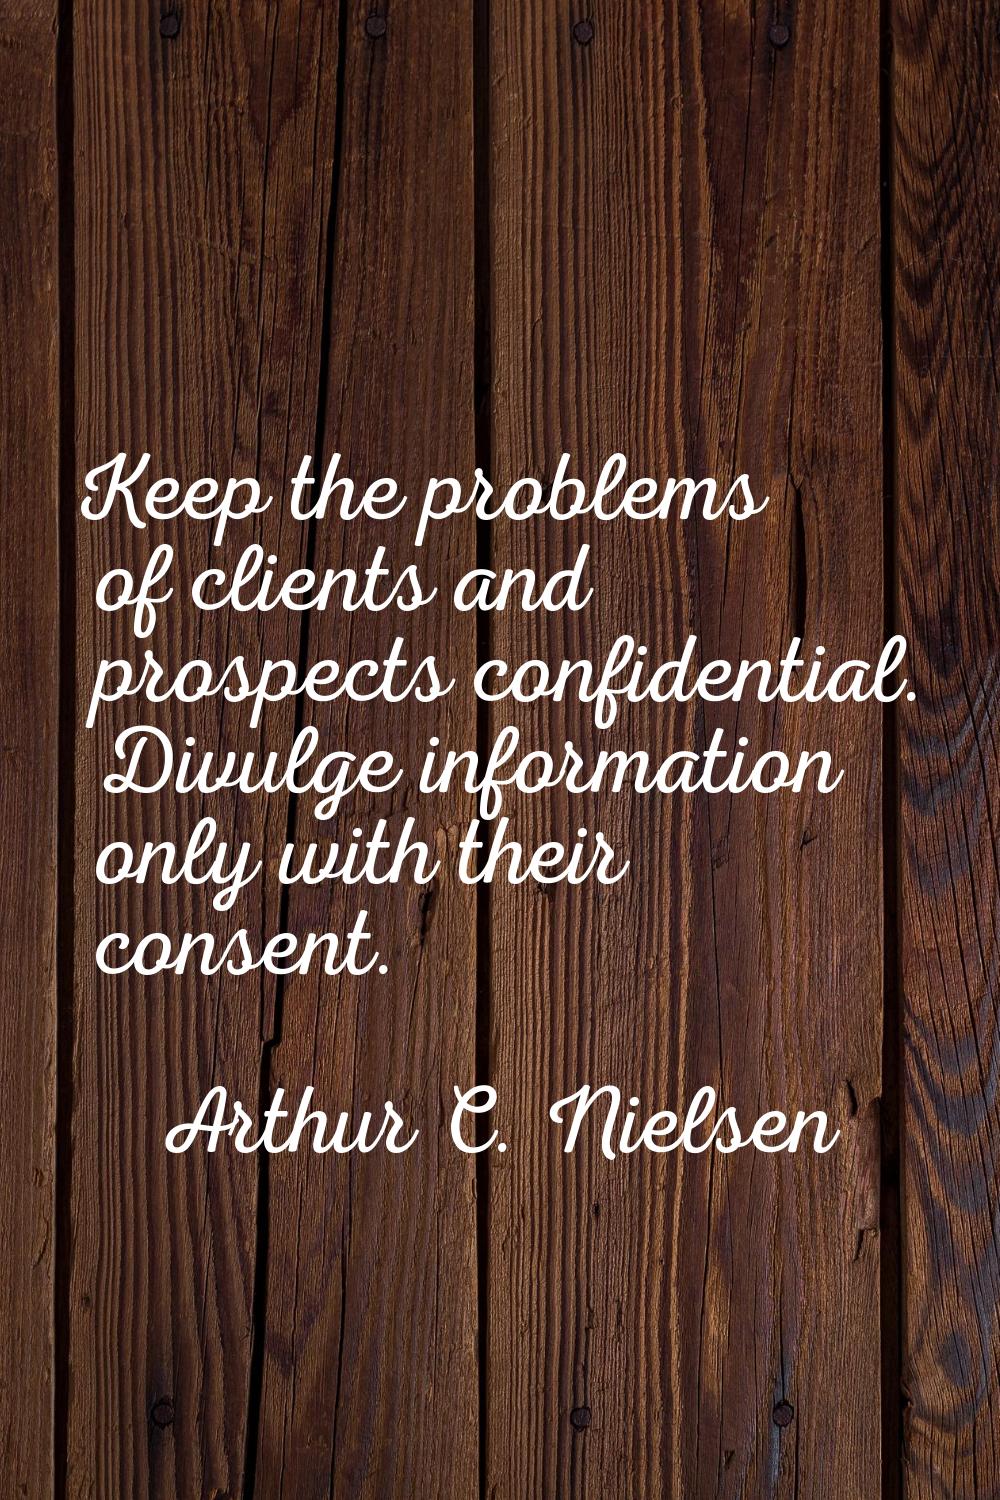 Keep the problems of clients and prospects confidential. Divulge information only with their consen